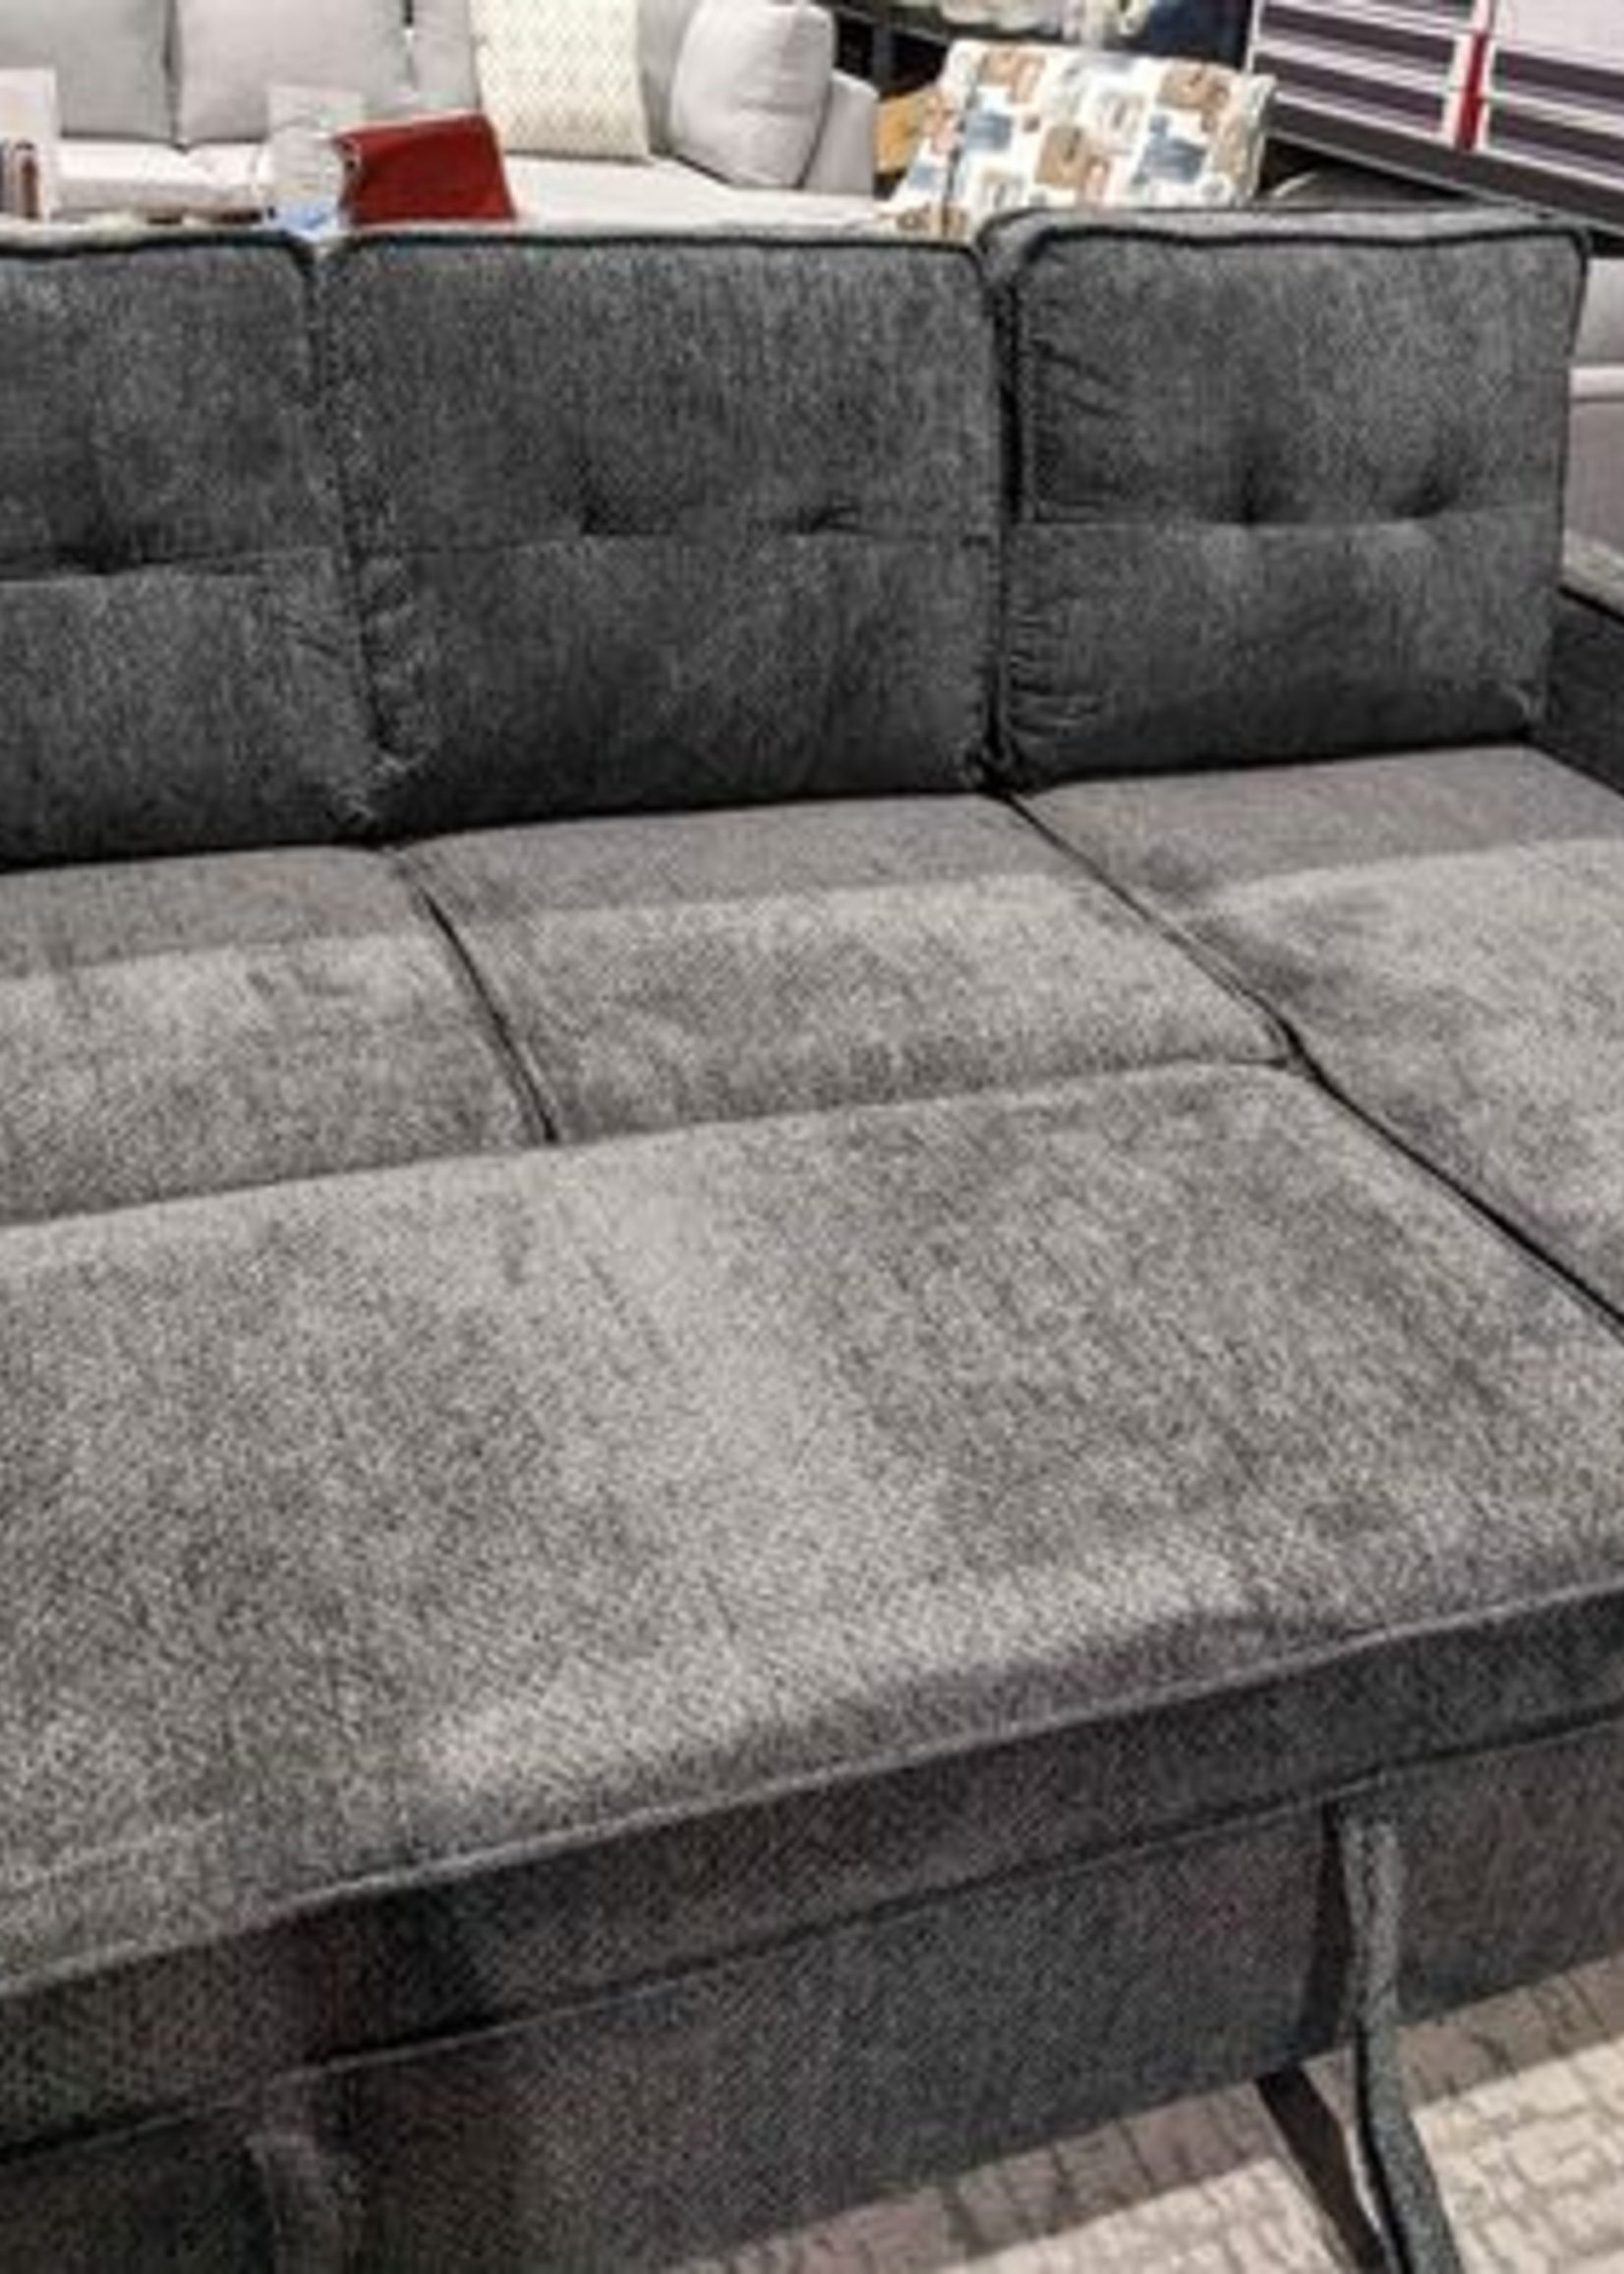 Carlton Reversible Sectional 89" by 58" Storage in chaise